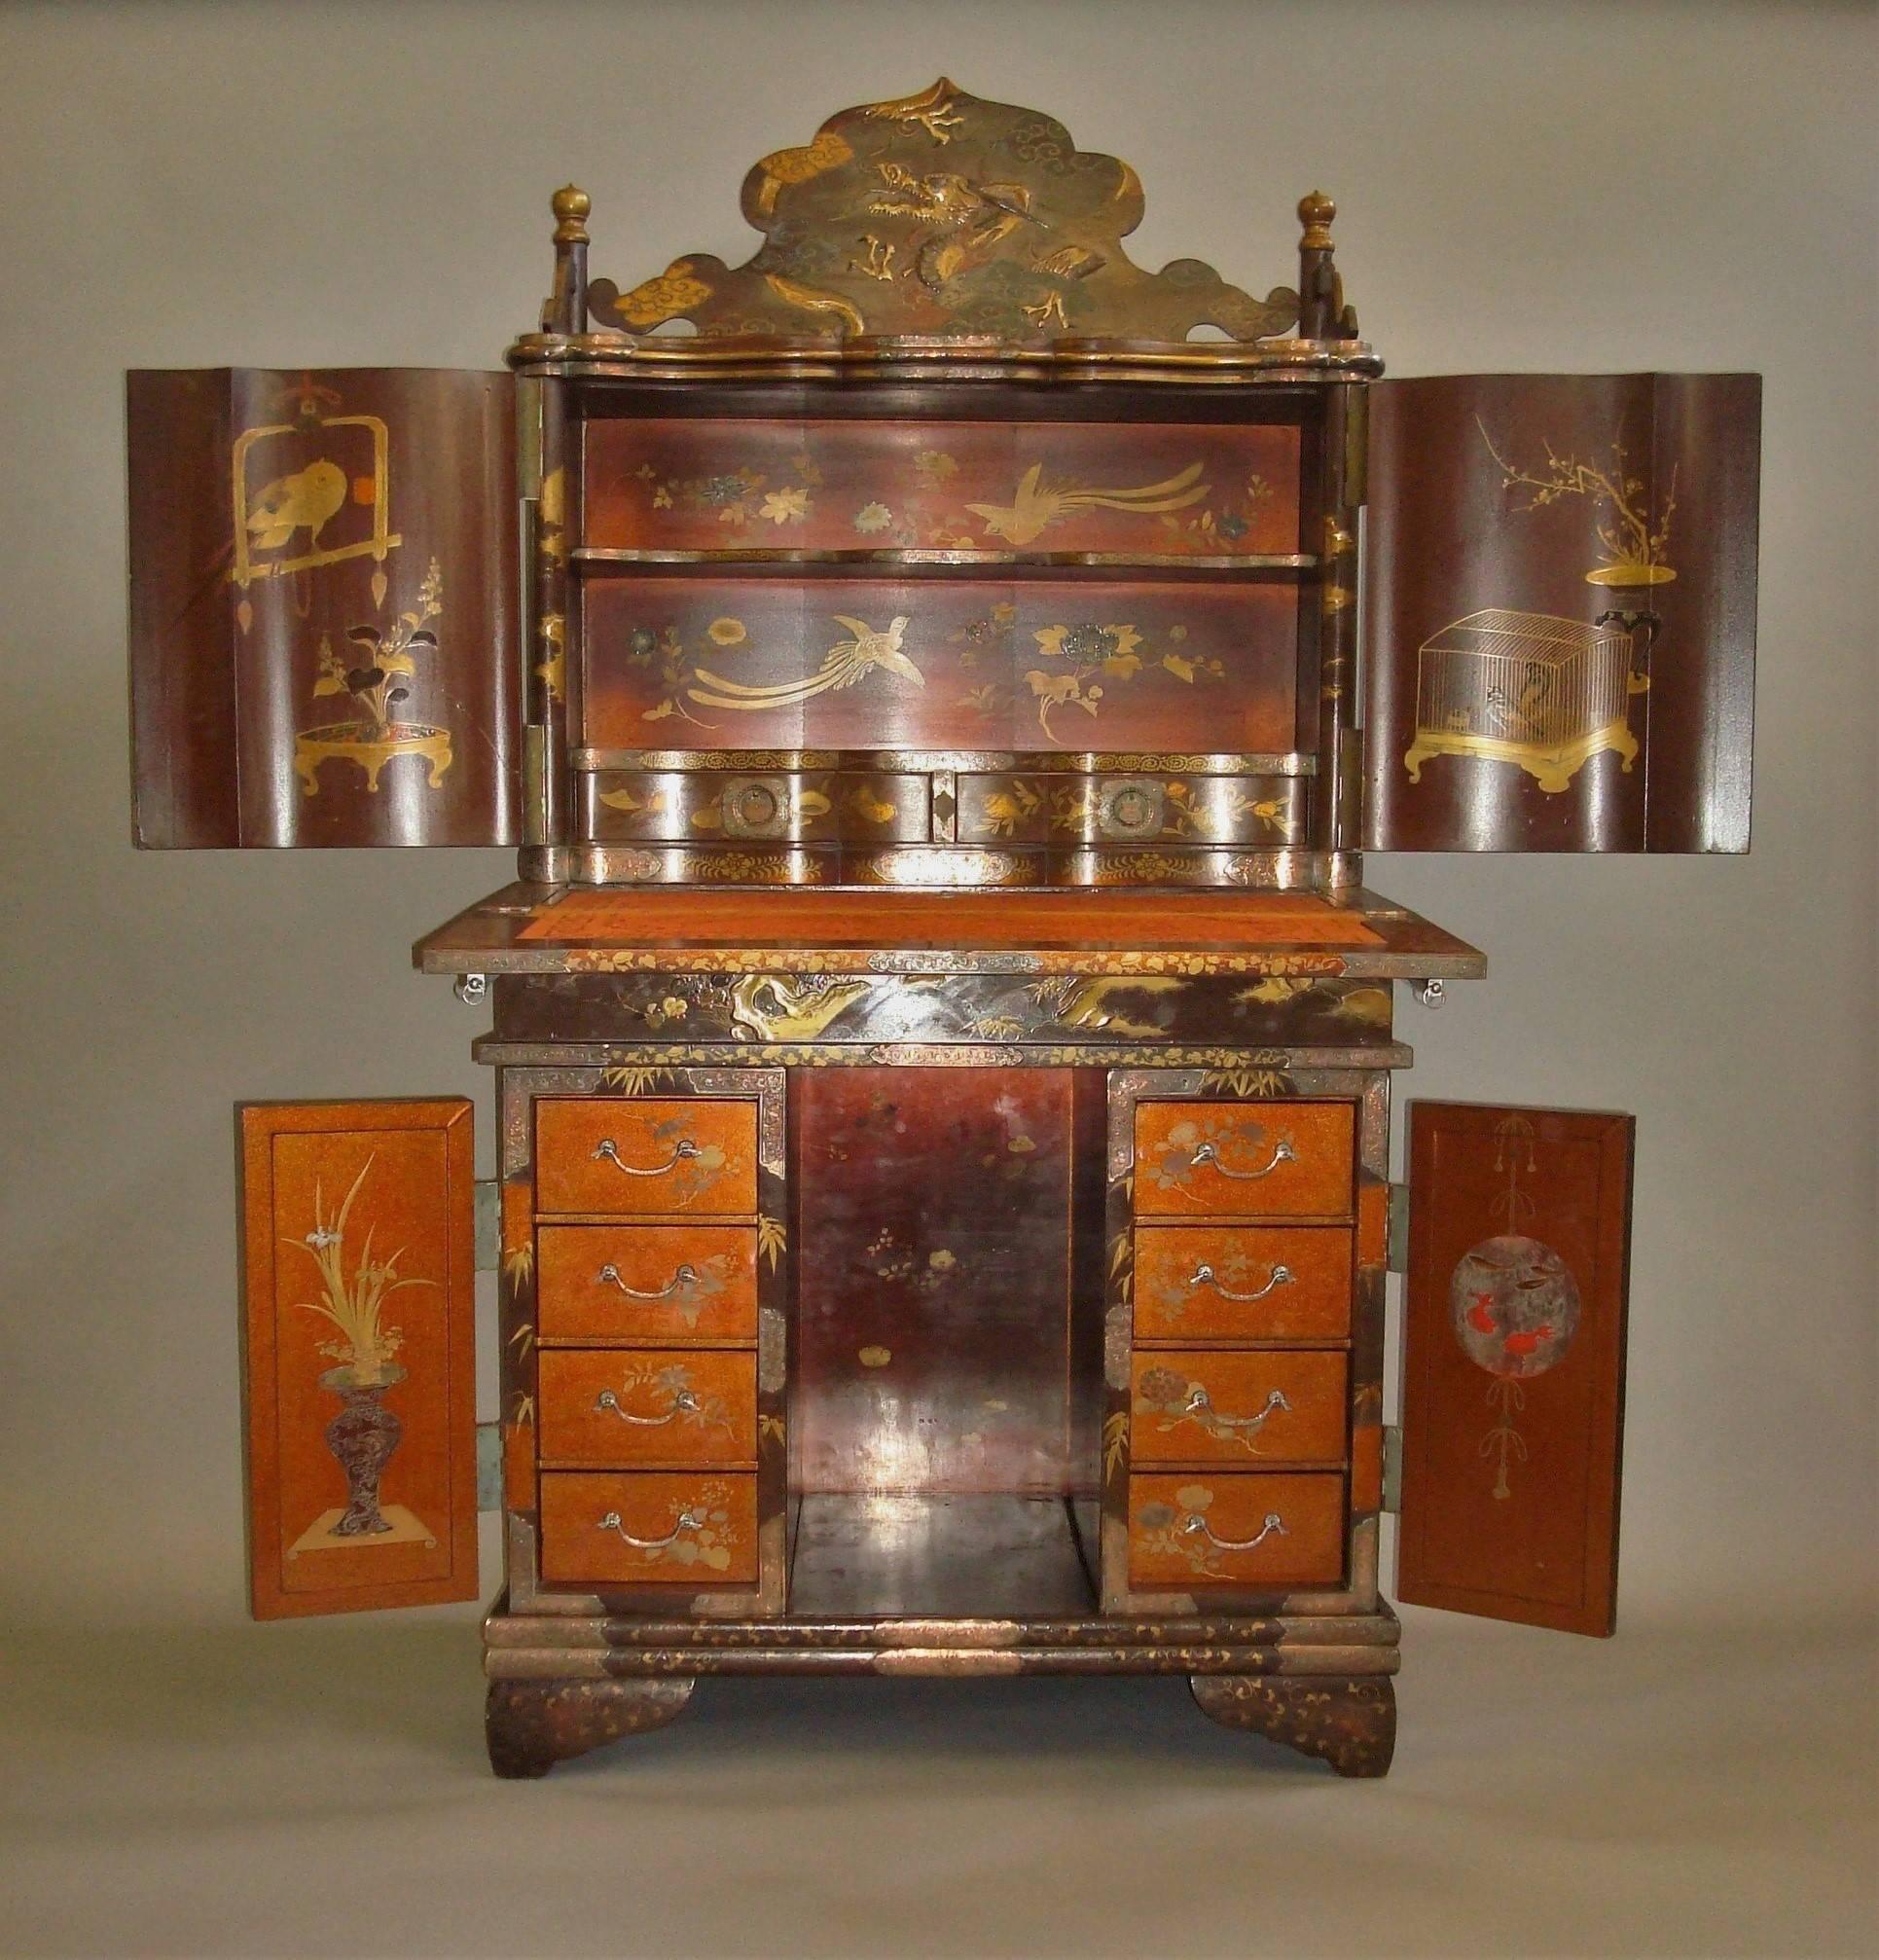 An excellent 19th century Japanese writing cabinet of unusual design, small proportions and profusely decorated; the shaped back with a dragon scene and gilt finials to the corners, above a pair of serpentine panelled doors depicting lions in a